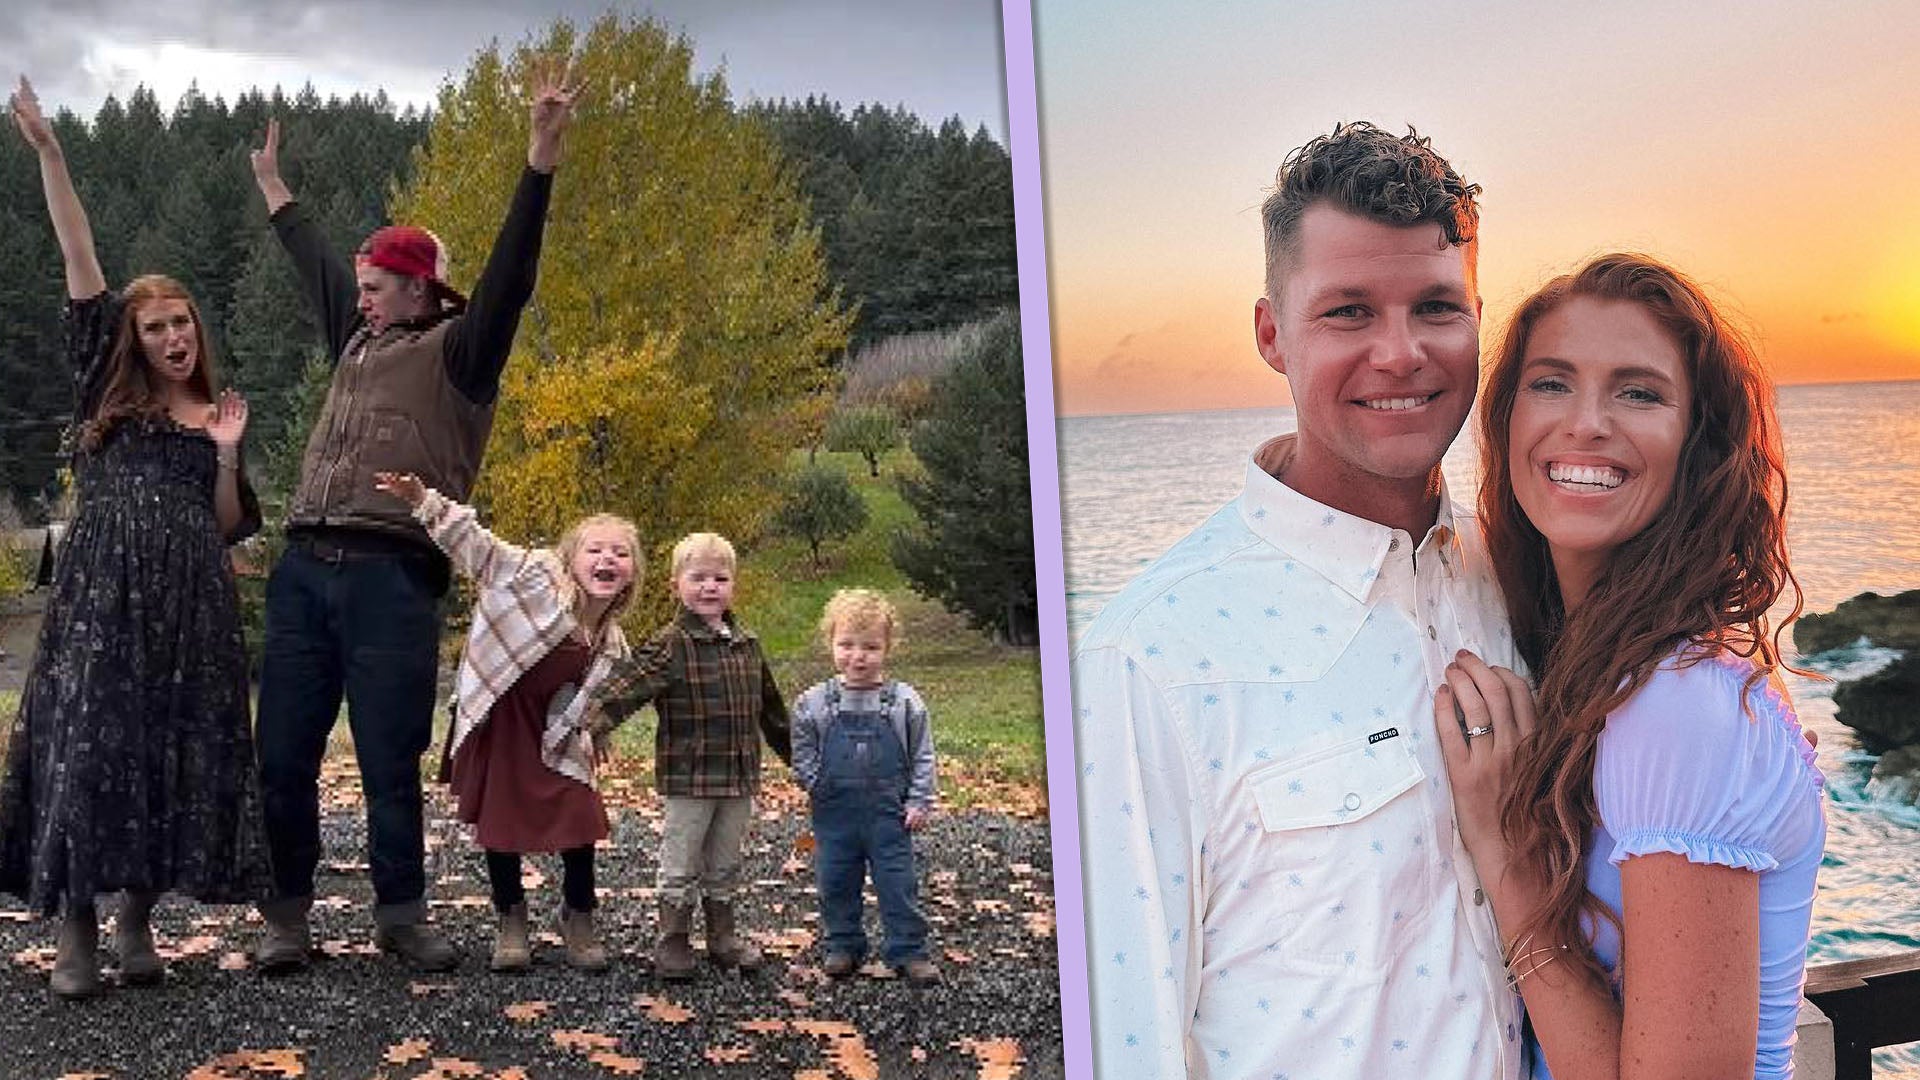 'Little People, Big World's Jeremy Roloff and Wife Announce Baby No. 4 in Adorable Video